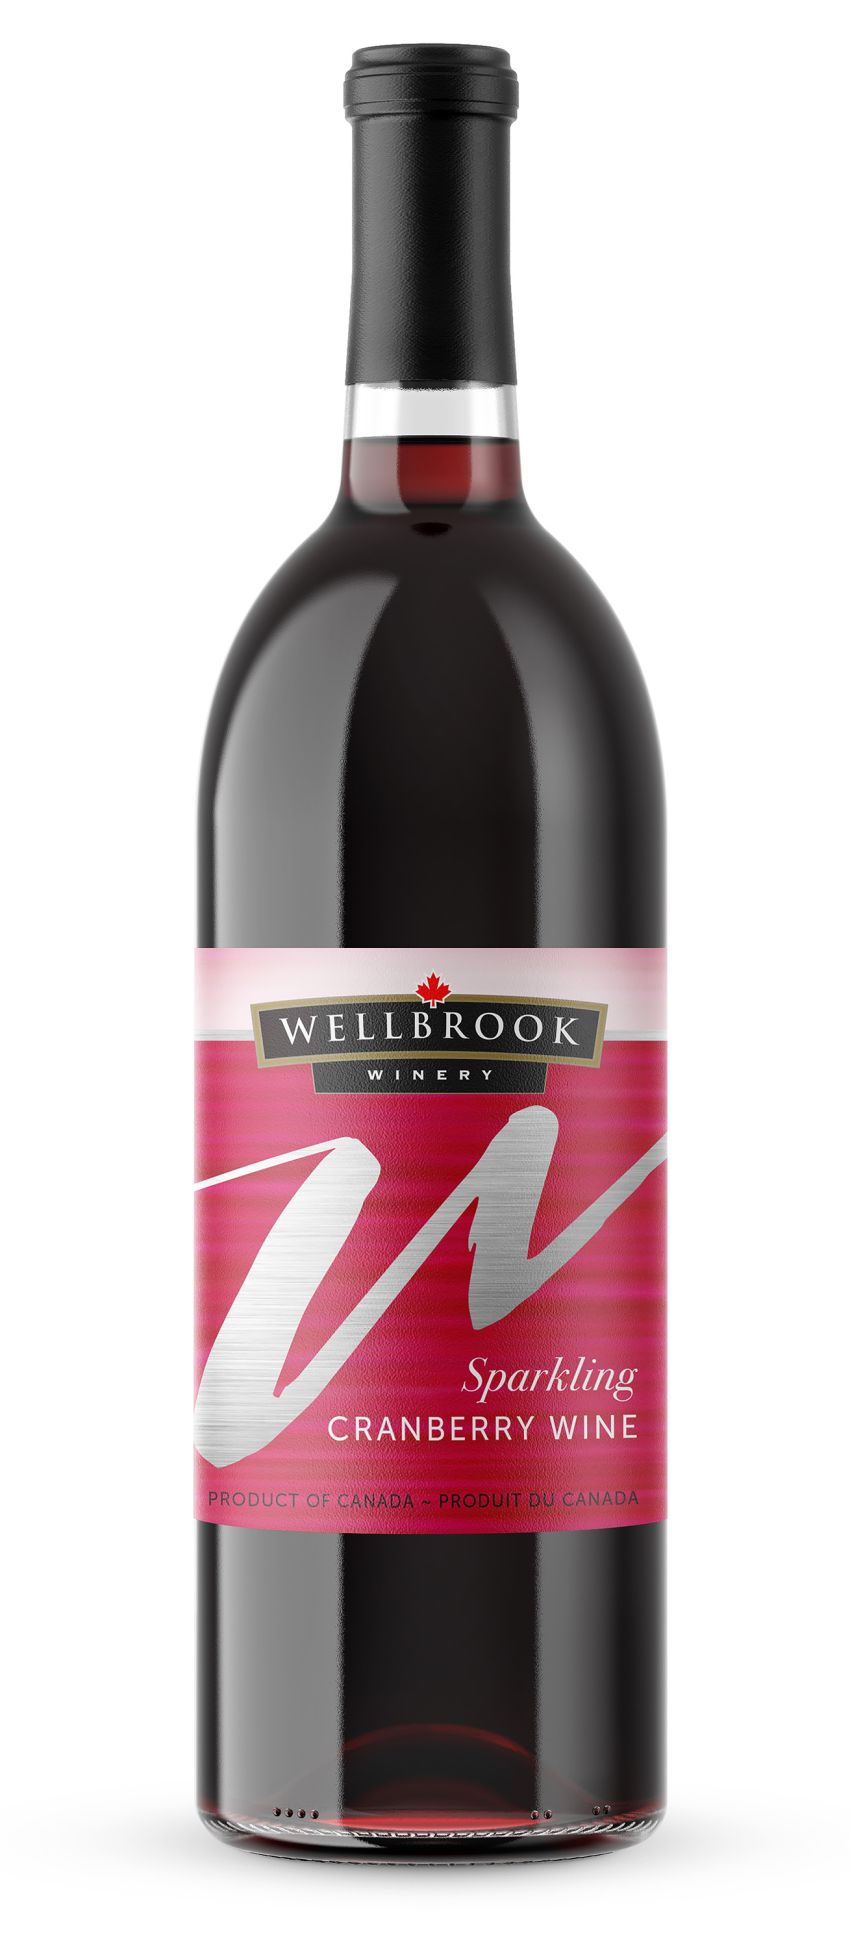 Wellbrook Winery - Our Wines